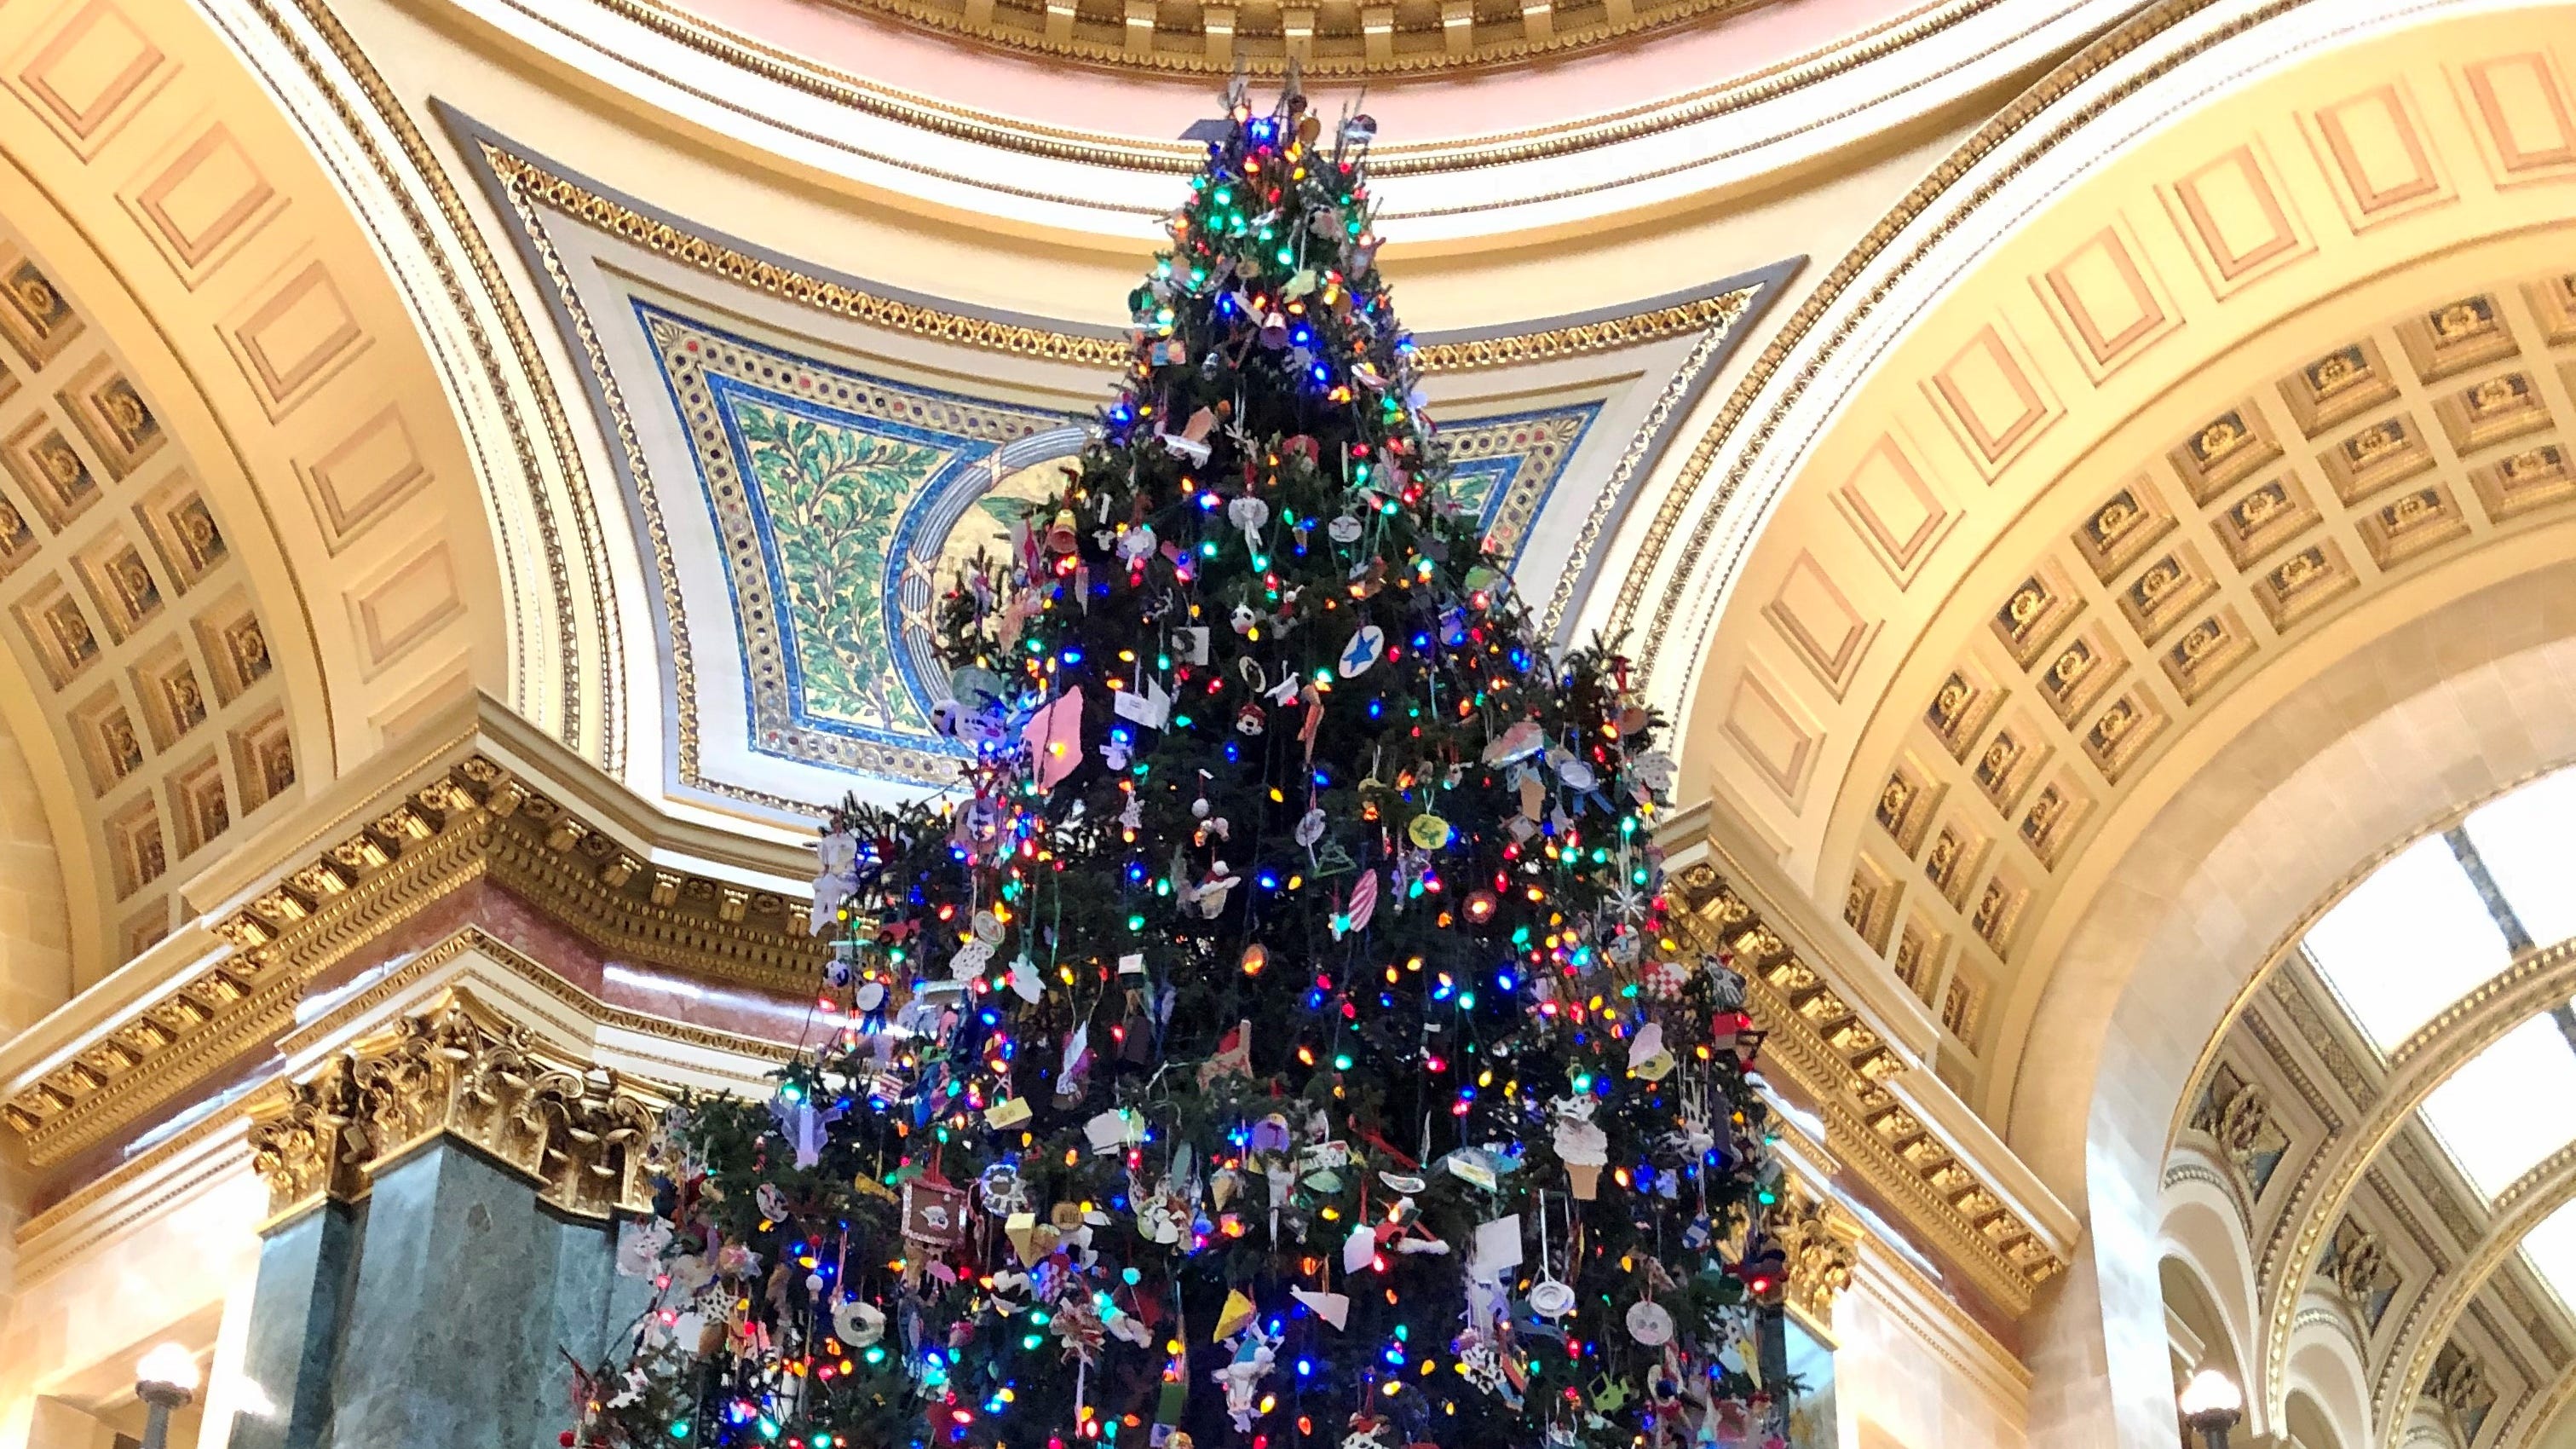 A child looks at the evergreen in the Wisconsin State Capitol on Dec. 22, 2018. The tree that sits in the Capitol rotunda during November and December will again be called a Holiday Tree, Gov. Tony Evers announced Friday. Former Gov. Scott Walker had called it a Christmas Tree.